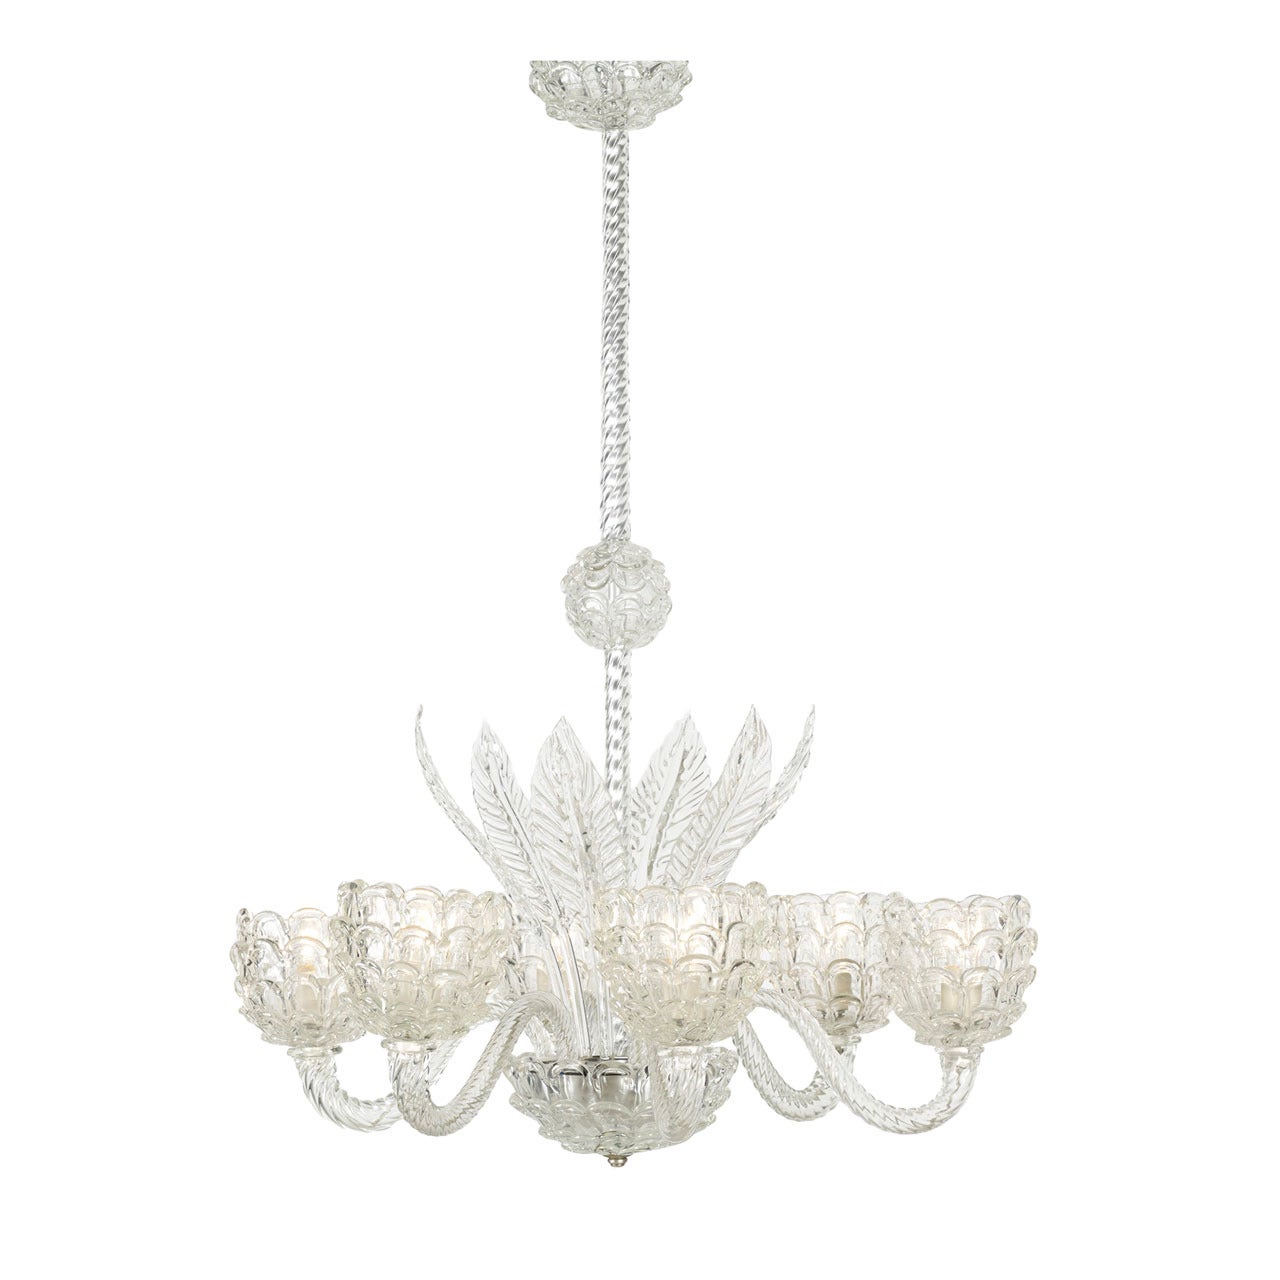 Chandelier by Barovier & Toso